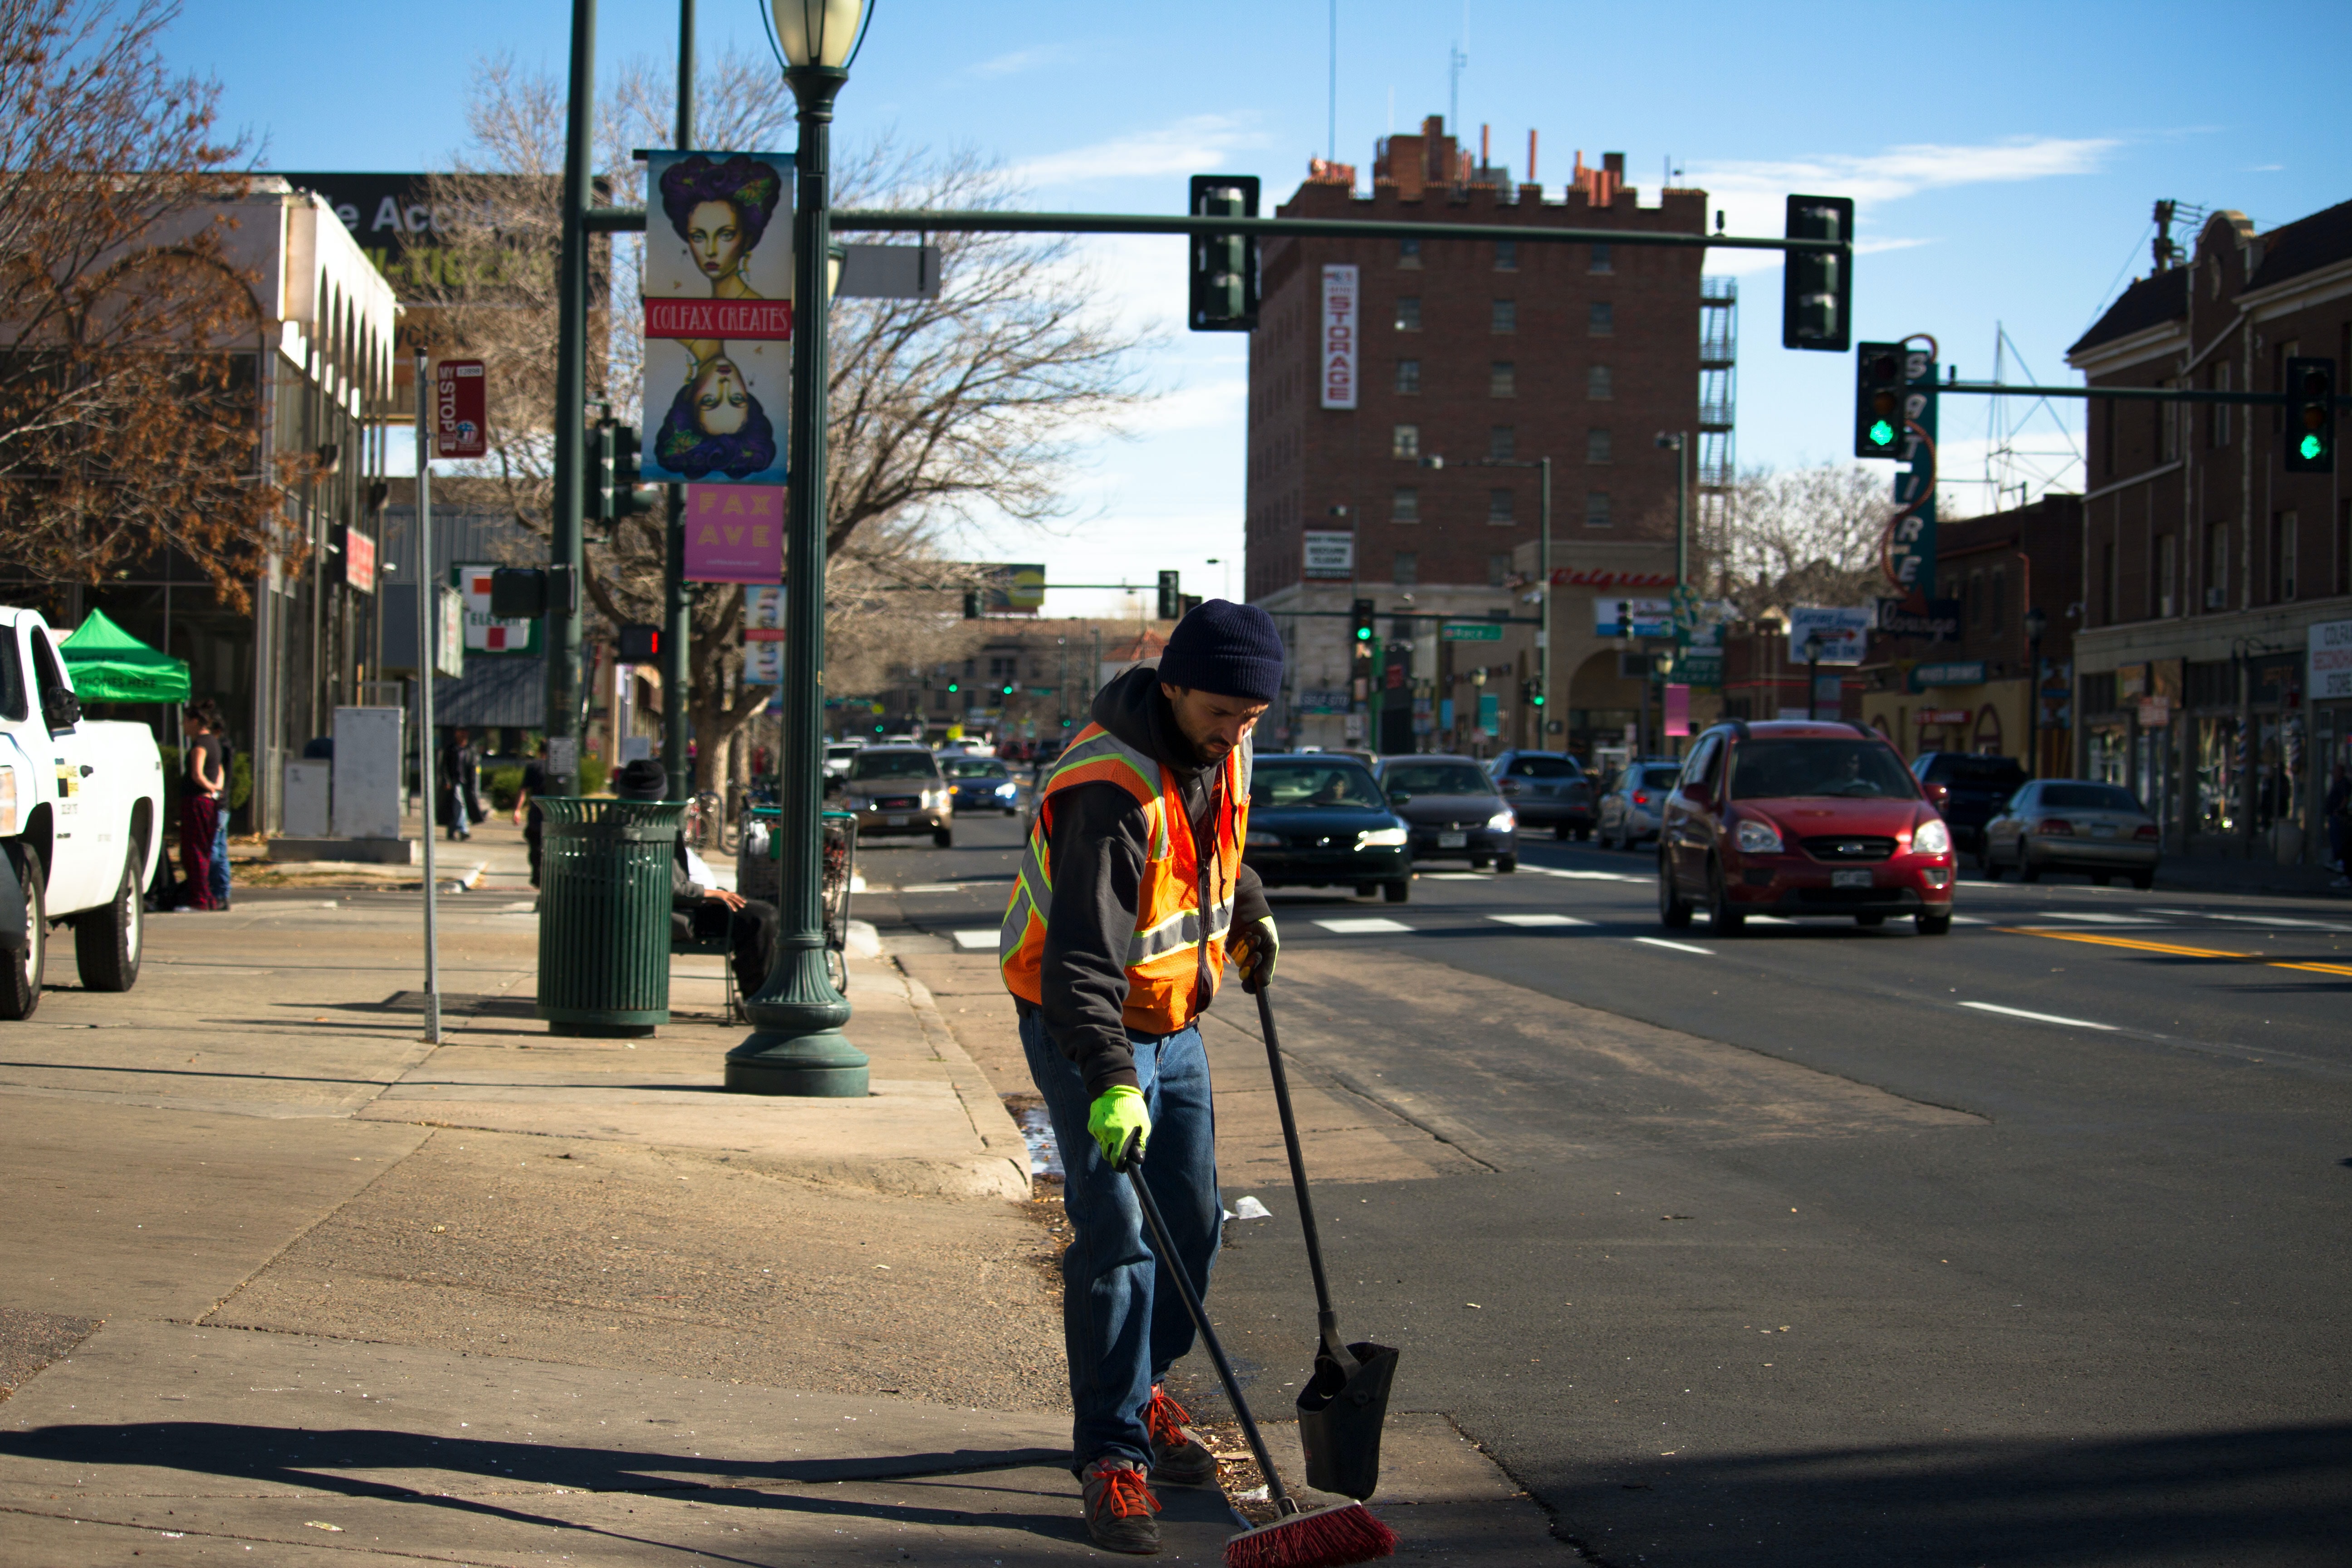 A young man wearing a navy blue toque, dark blue bootcut jeans, neon yellow gloves, a grey sweater, and a bright orange reflective vest sweeps a city street with a broom and dustpan.